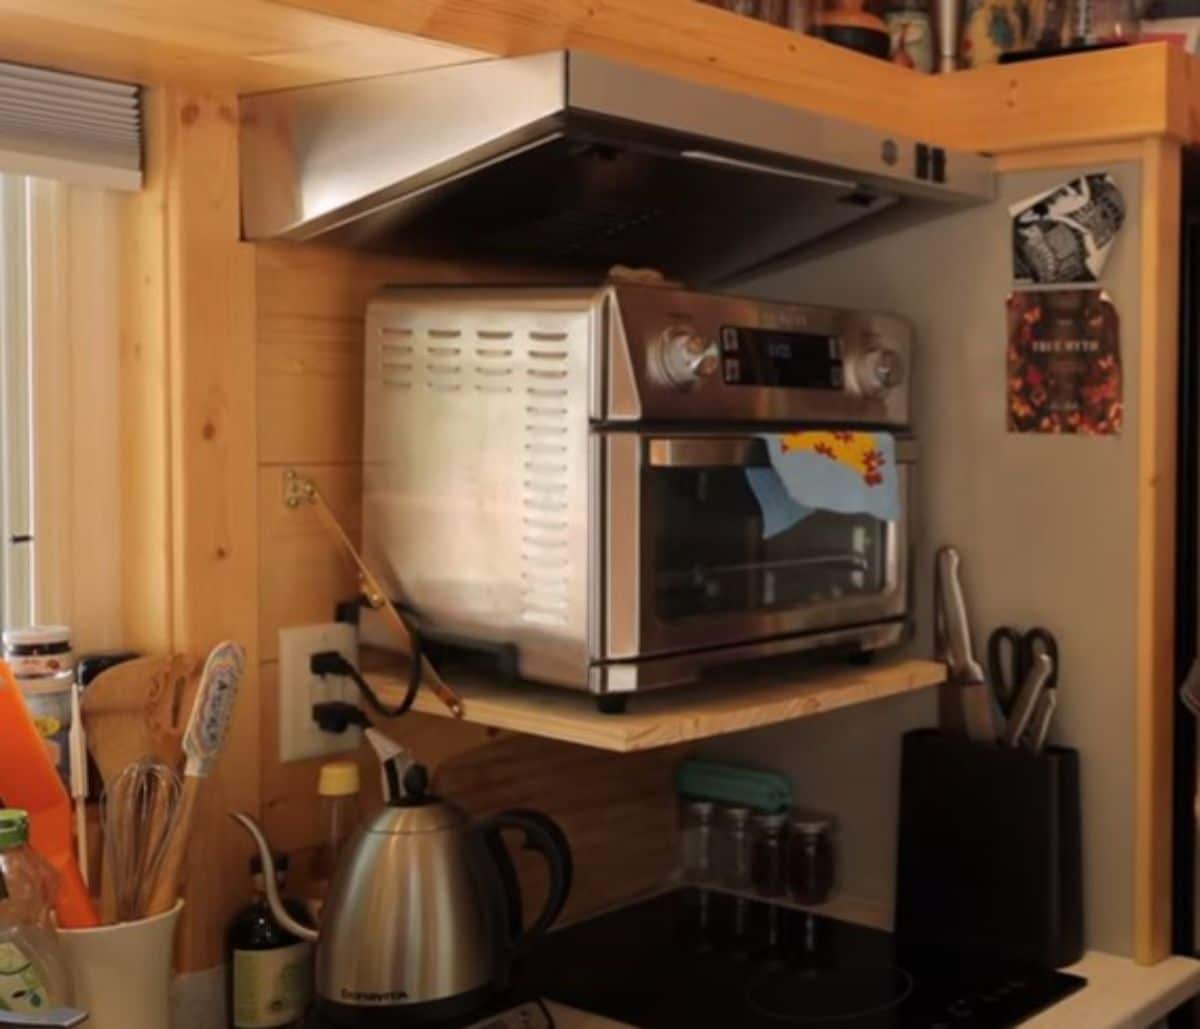 convection oven on shelf above cooktop